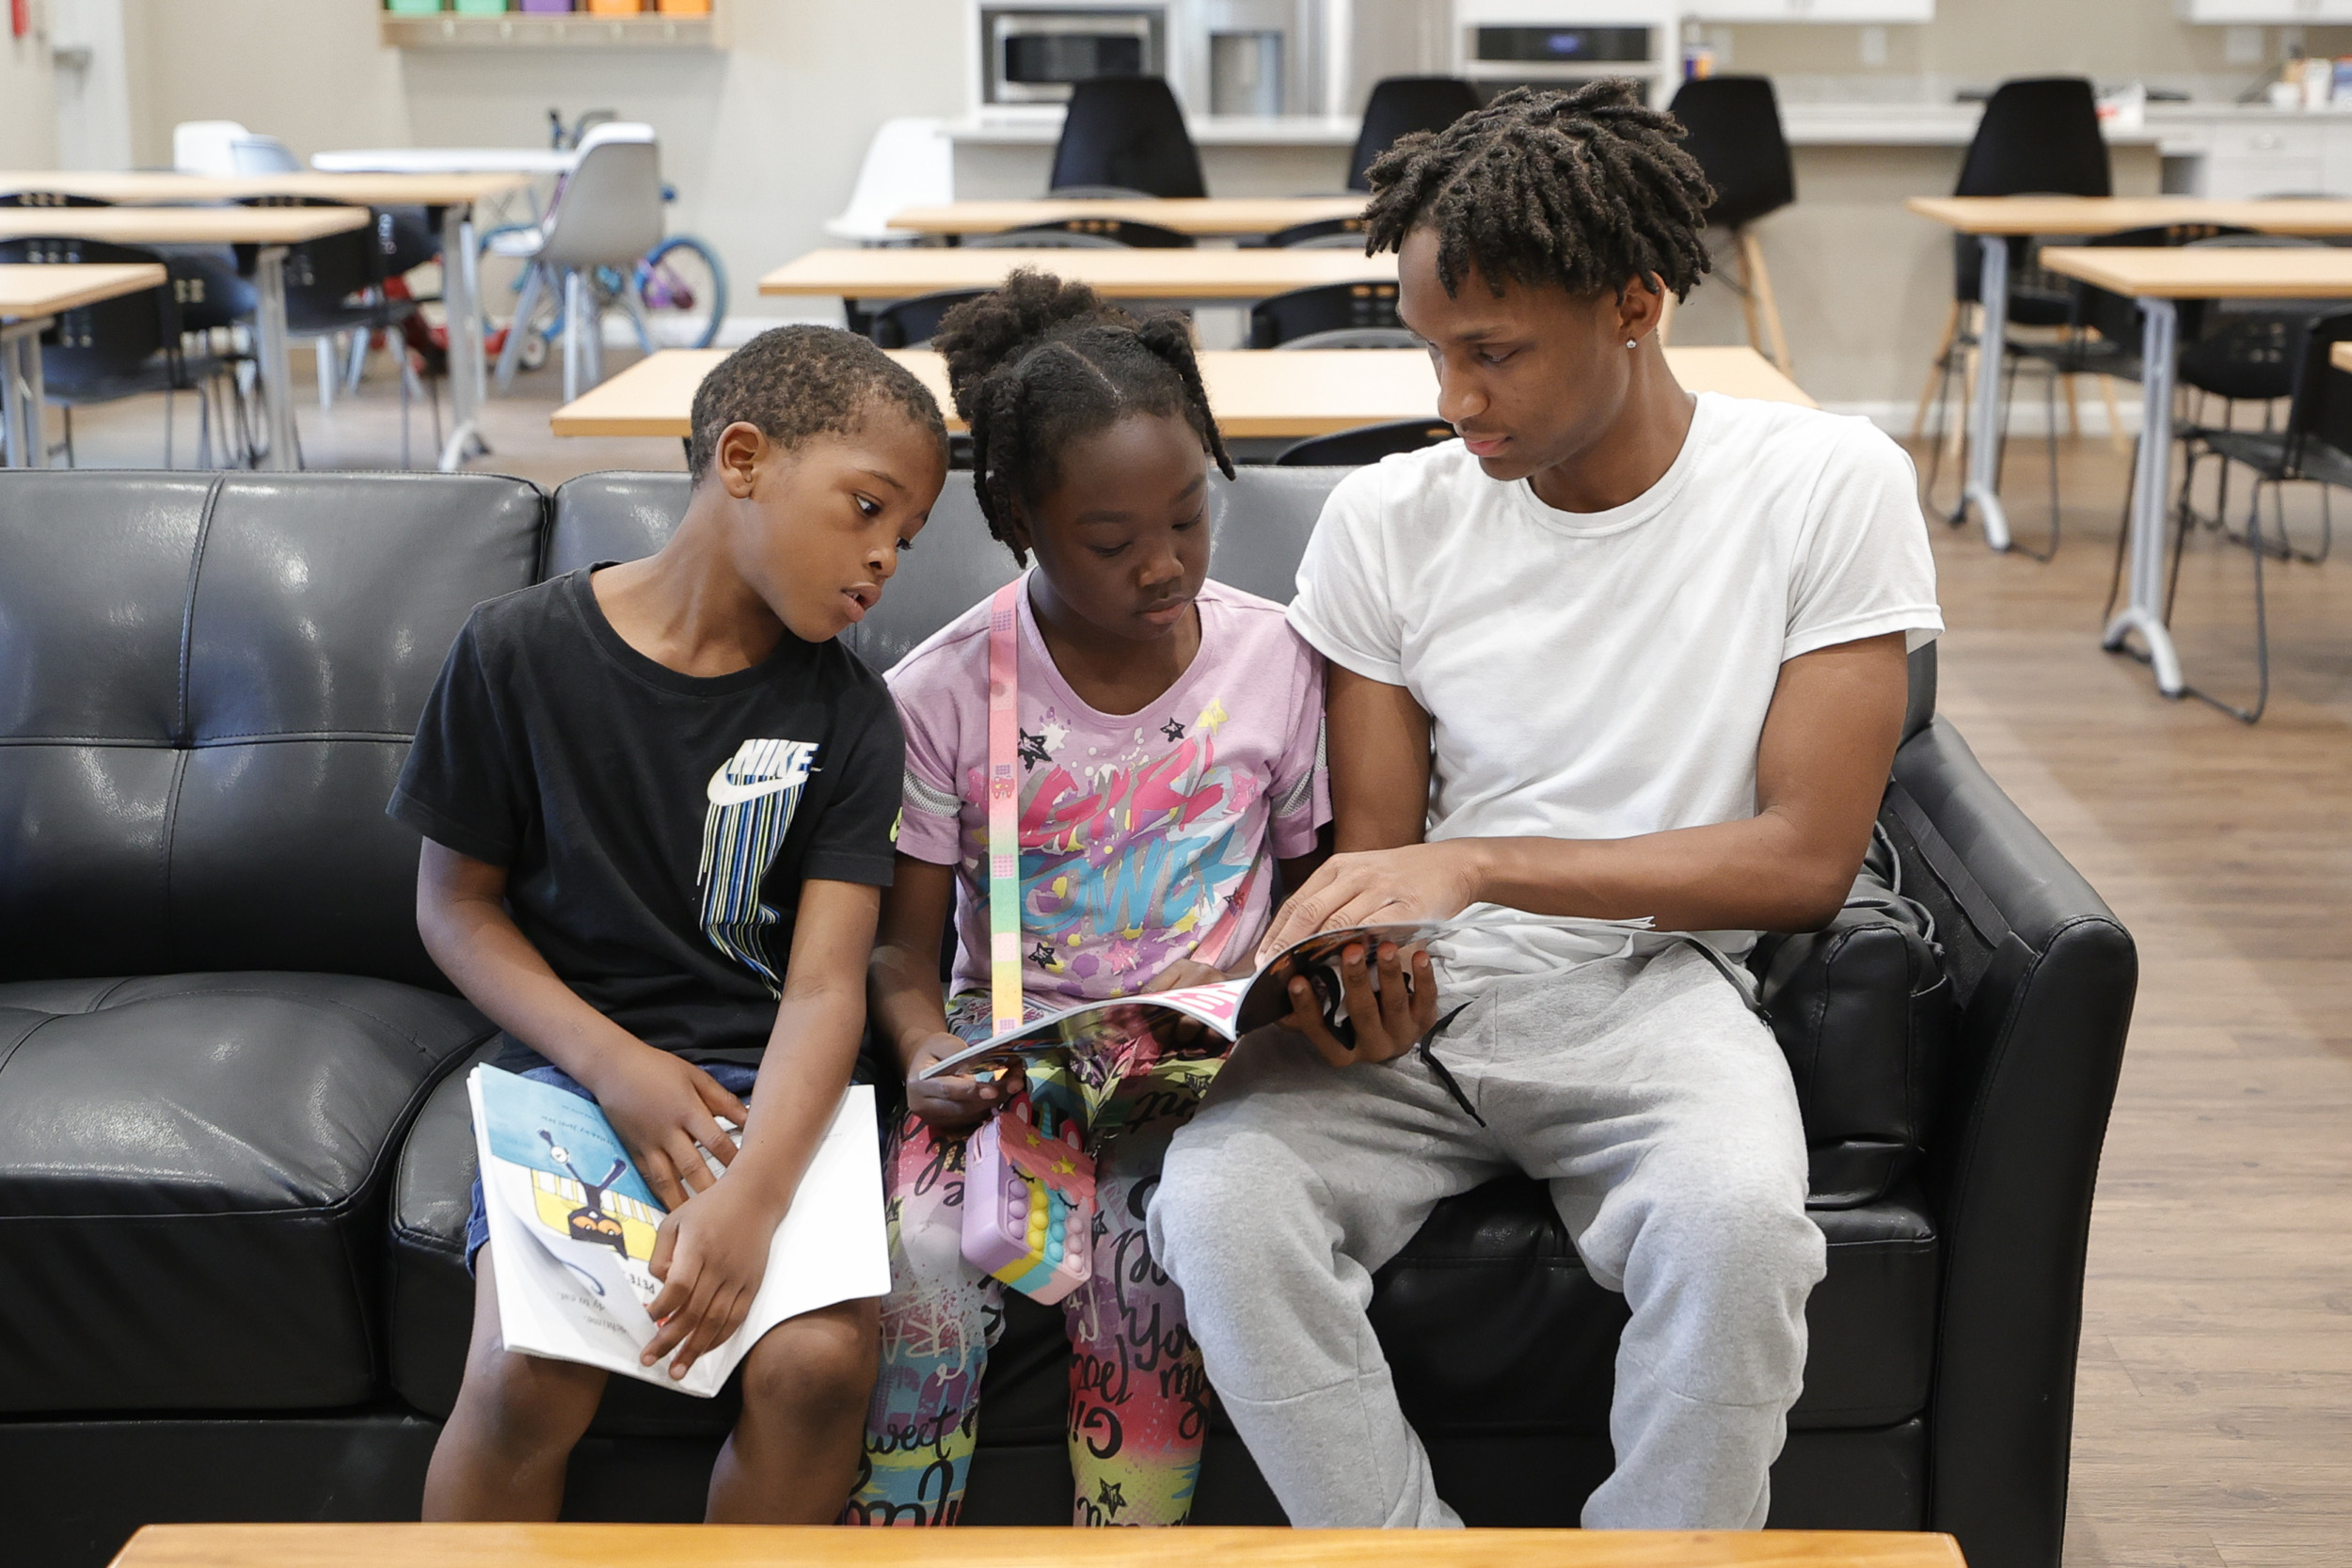 Reading: Two young Black children sit on couch holding books sitting next to Black adult helping them read